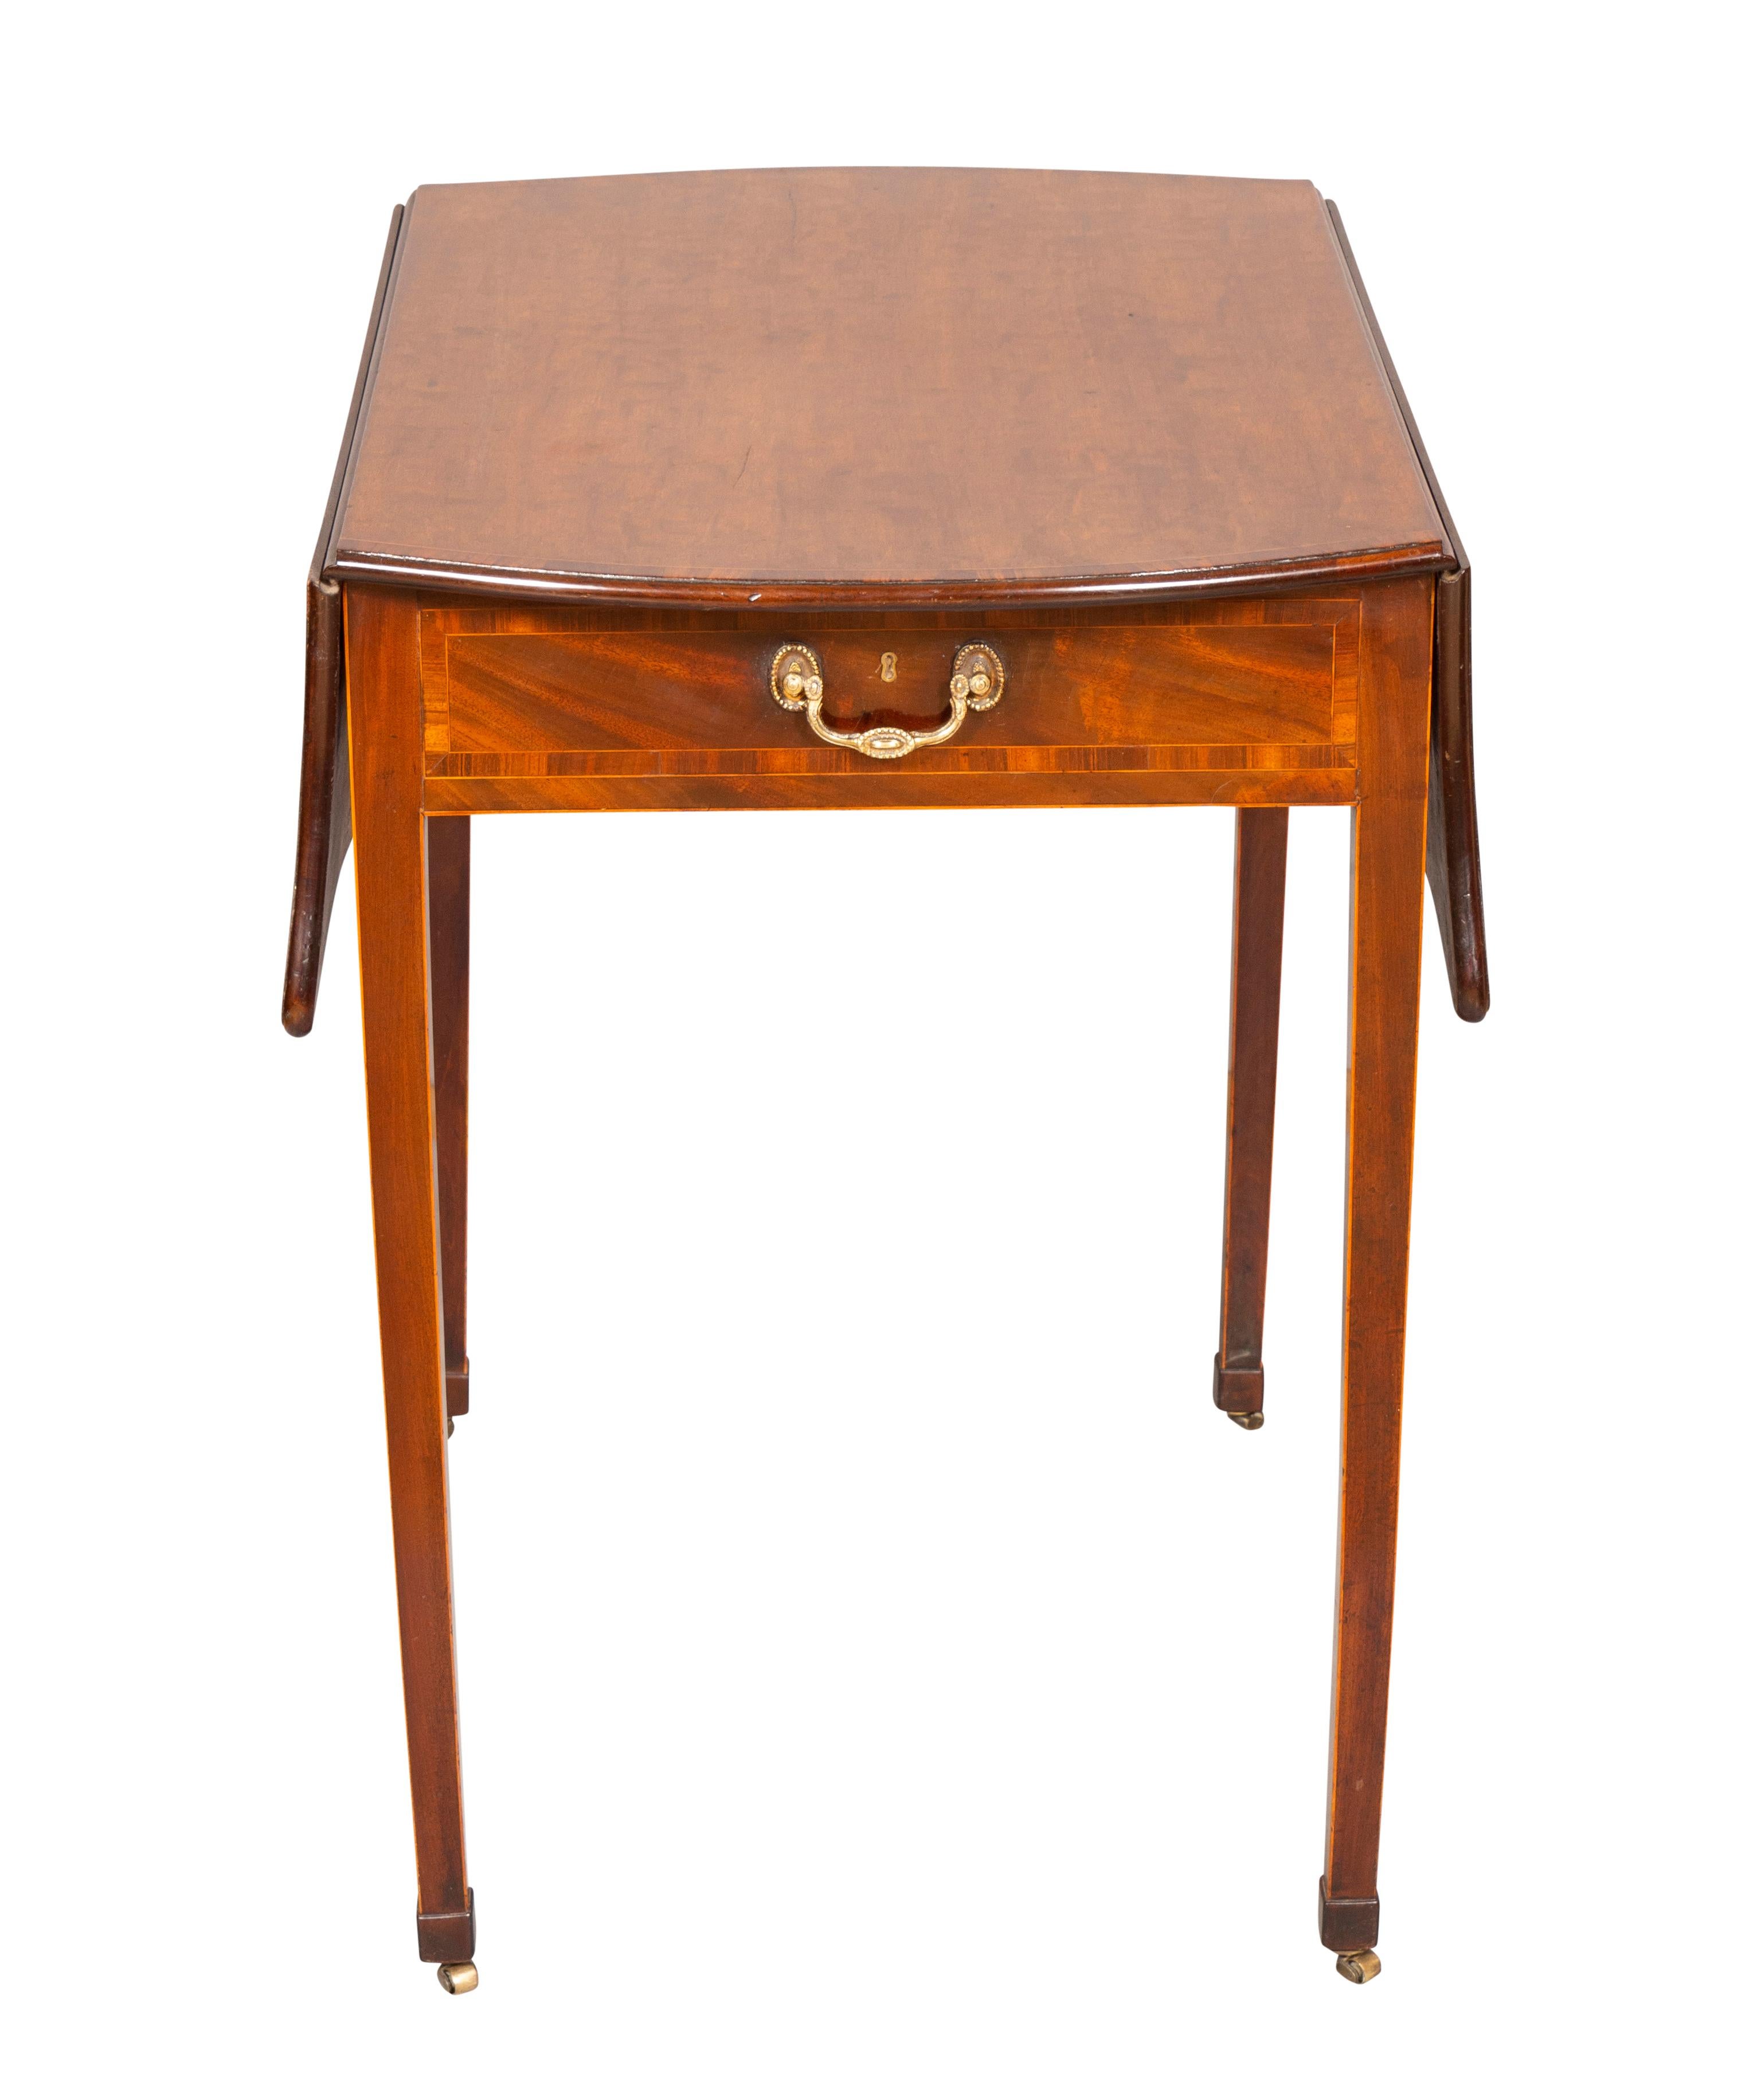 George III Mahogany And Gonsalvo Alves Pembroke Table In Good Condition For Sale In Essex, MA